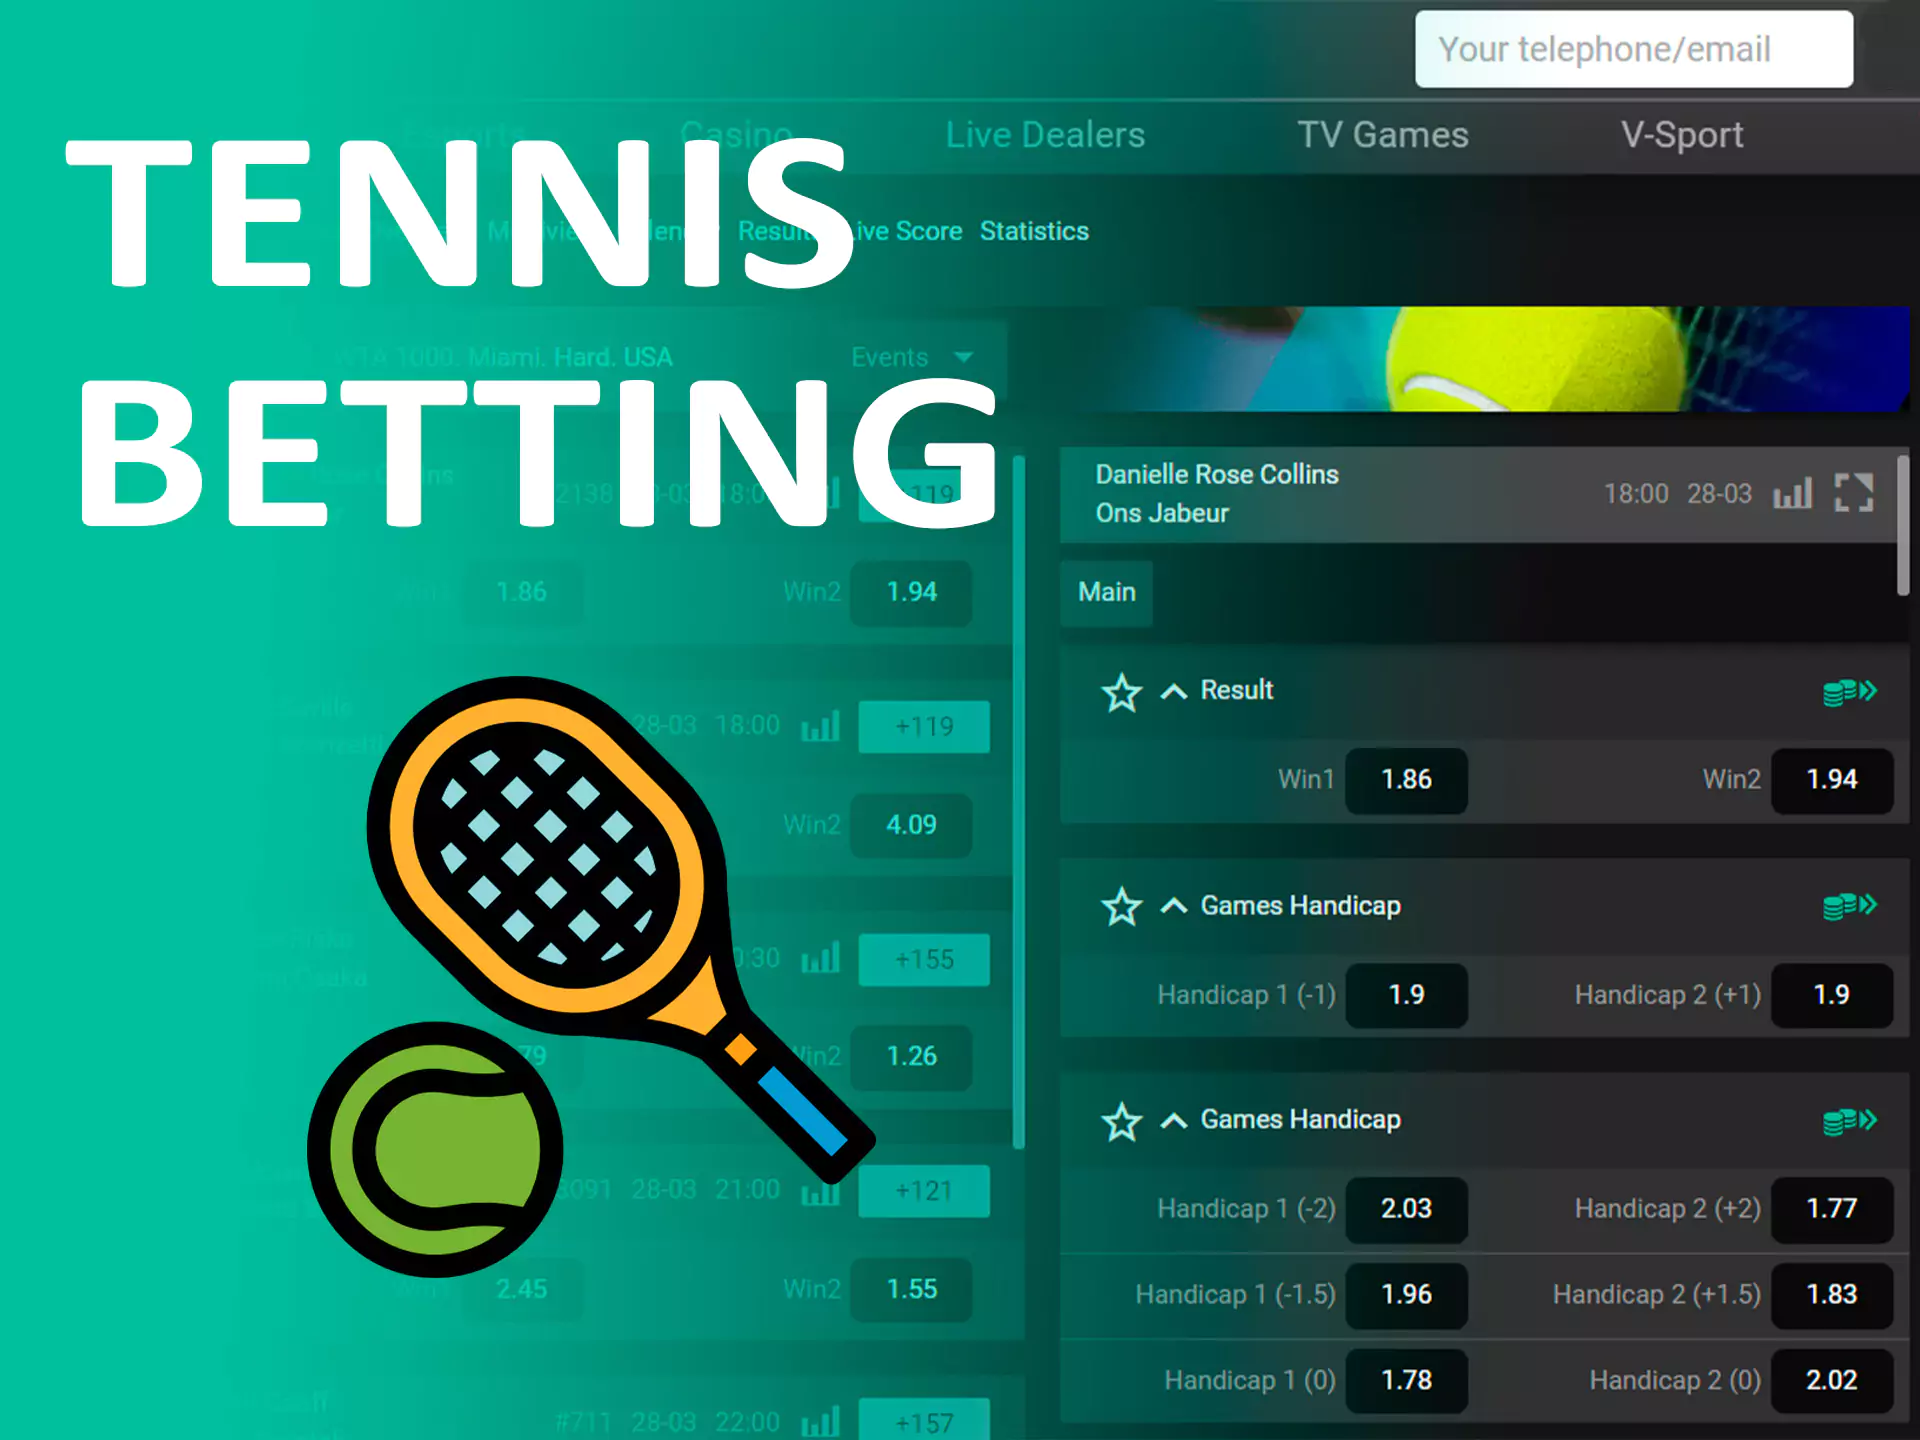 ATP, WTA and ITF events are available for betting at Pin-Up.